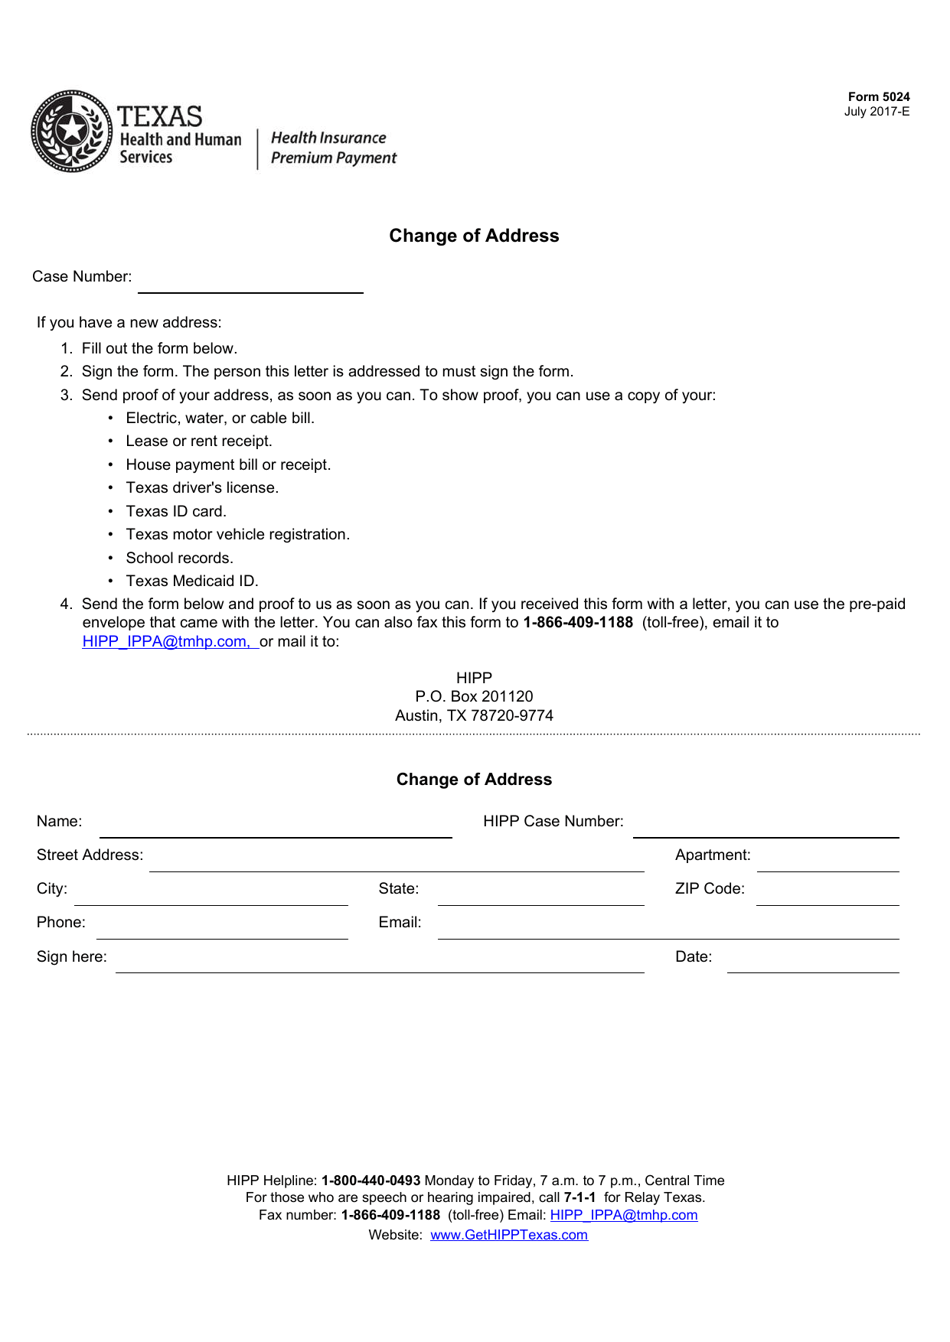 Form 5024 Change of Address - Texas, Page 1